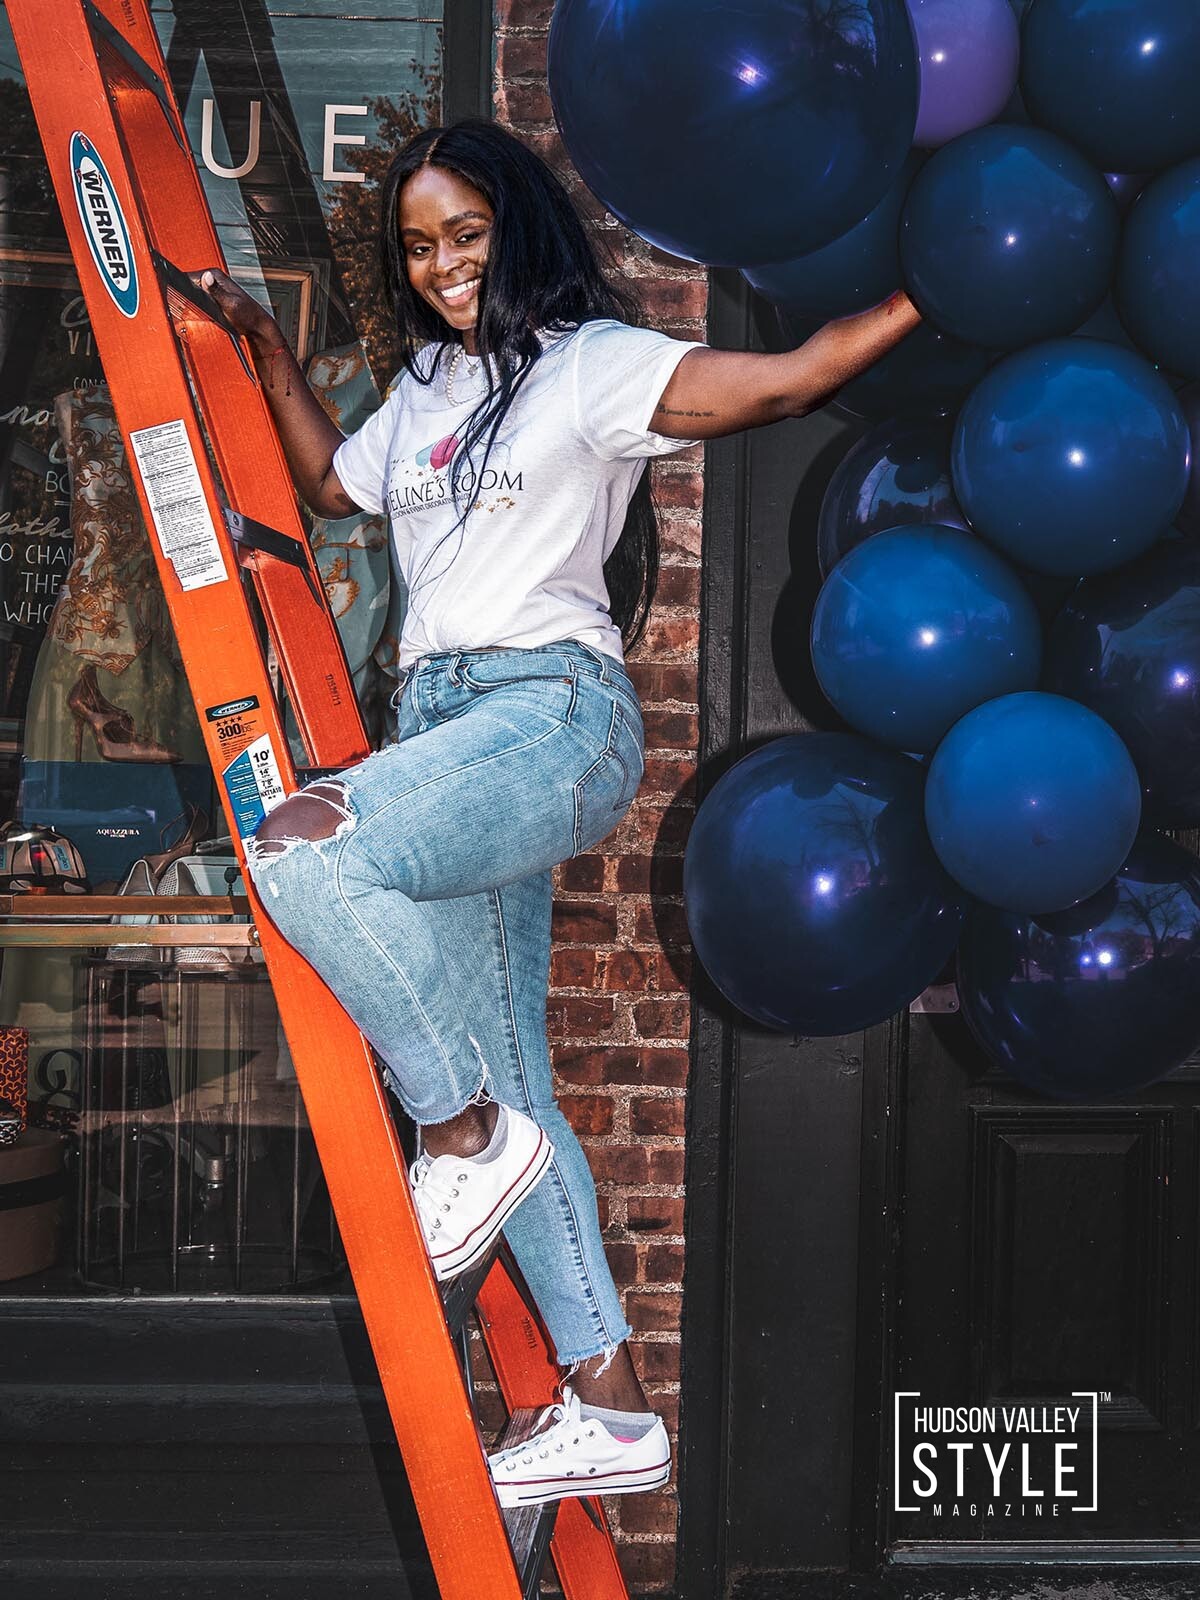 The Best Balloon Stylist in the Hudson Valley and Beyond – Interview with Latwan Banks of Madeline's Room – Exploring Hudson Valley with Dino Alexander